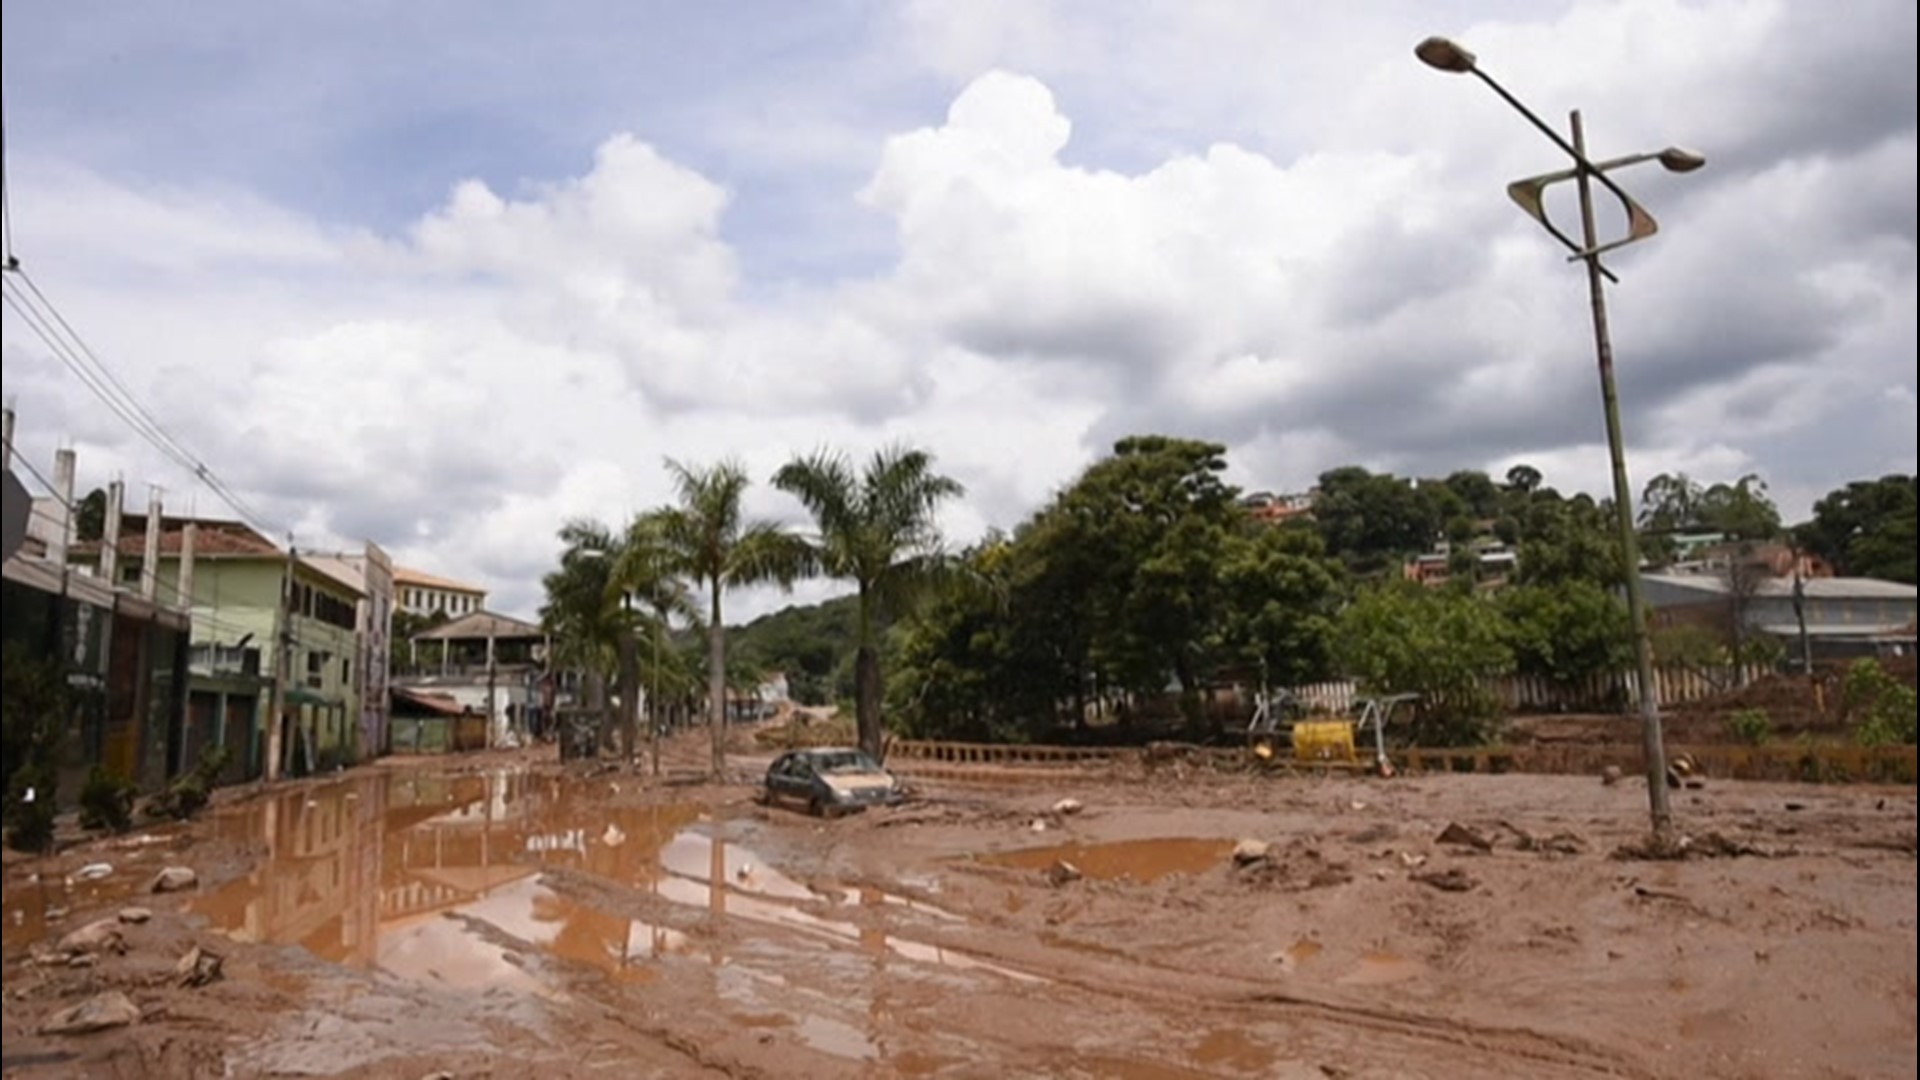 At least 44 people are dead after powerful storms lashed southeastern Brazil on Jan. 26. In Belo Horizonte, the Das Velhas River overflowed its banks and a landslide caused damage to homes.